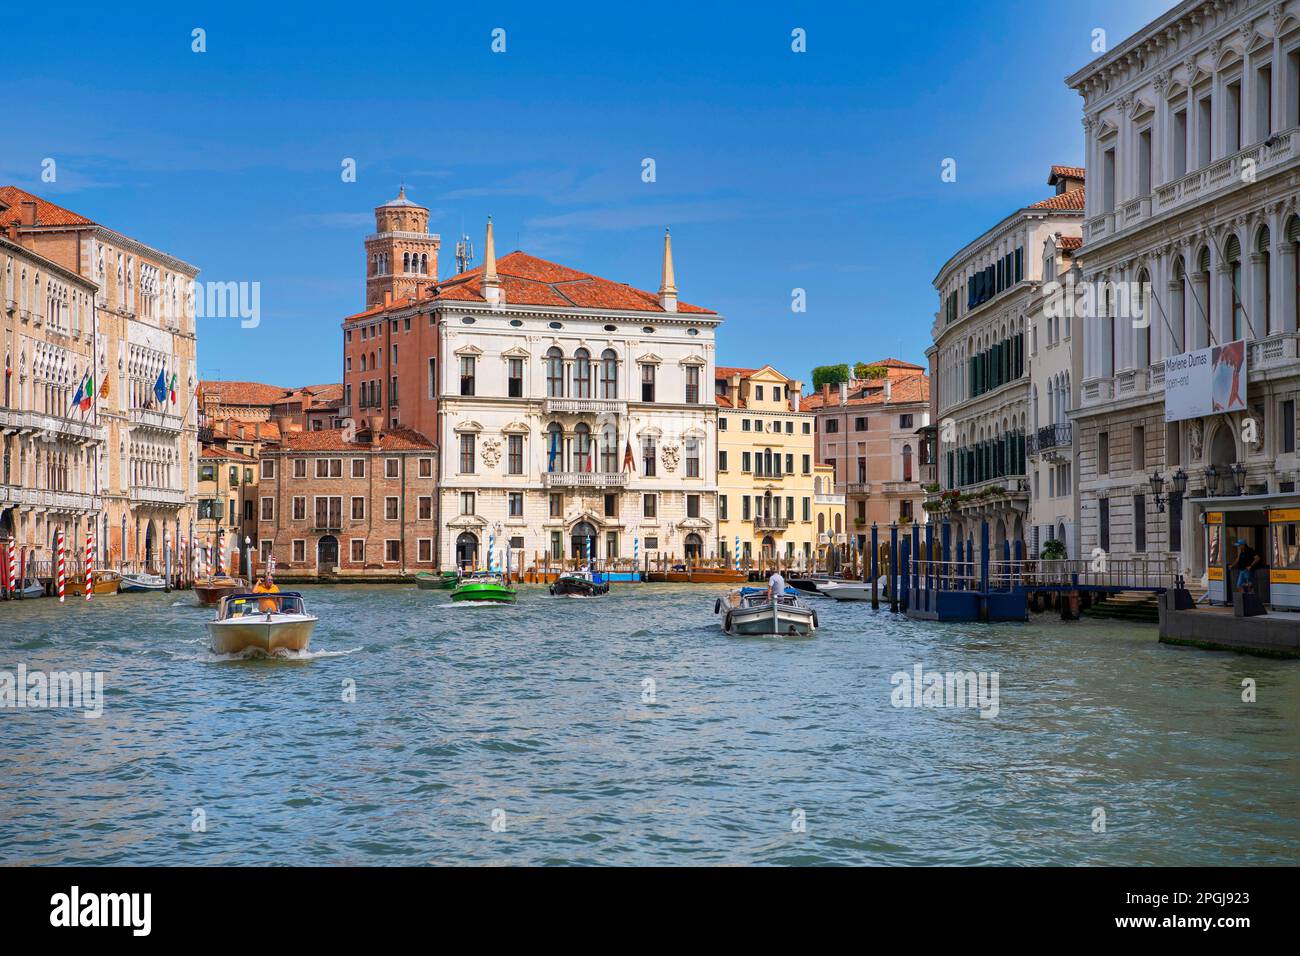 Historical palaces on the Grand Canal, Palazzo Balbi in the background, Italy, Venice Stock Photo